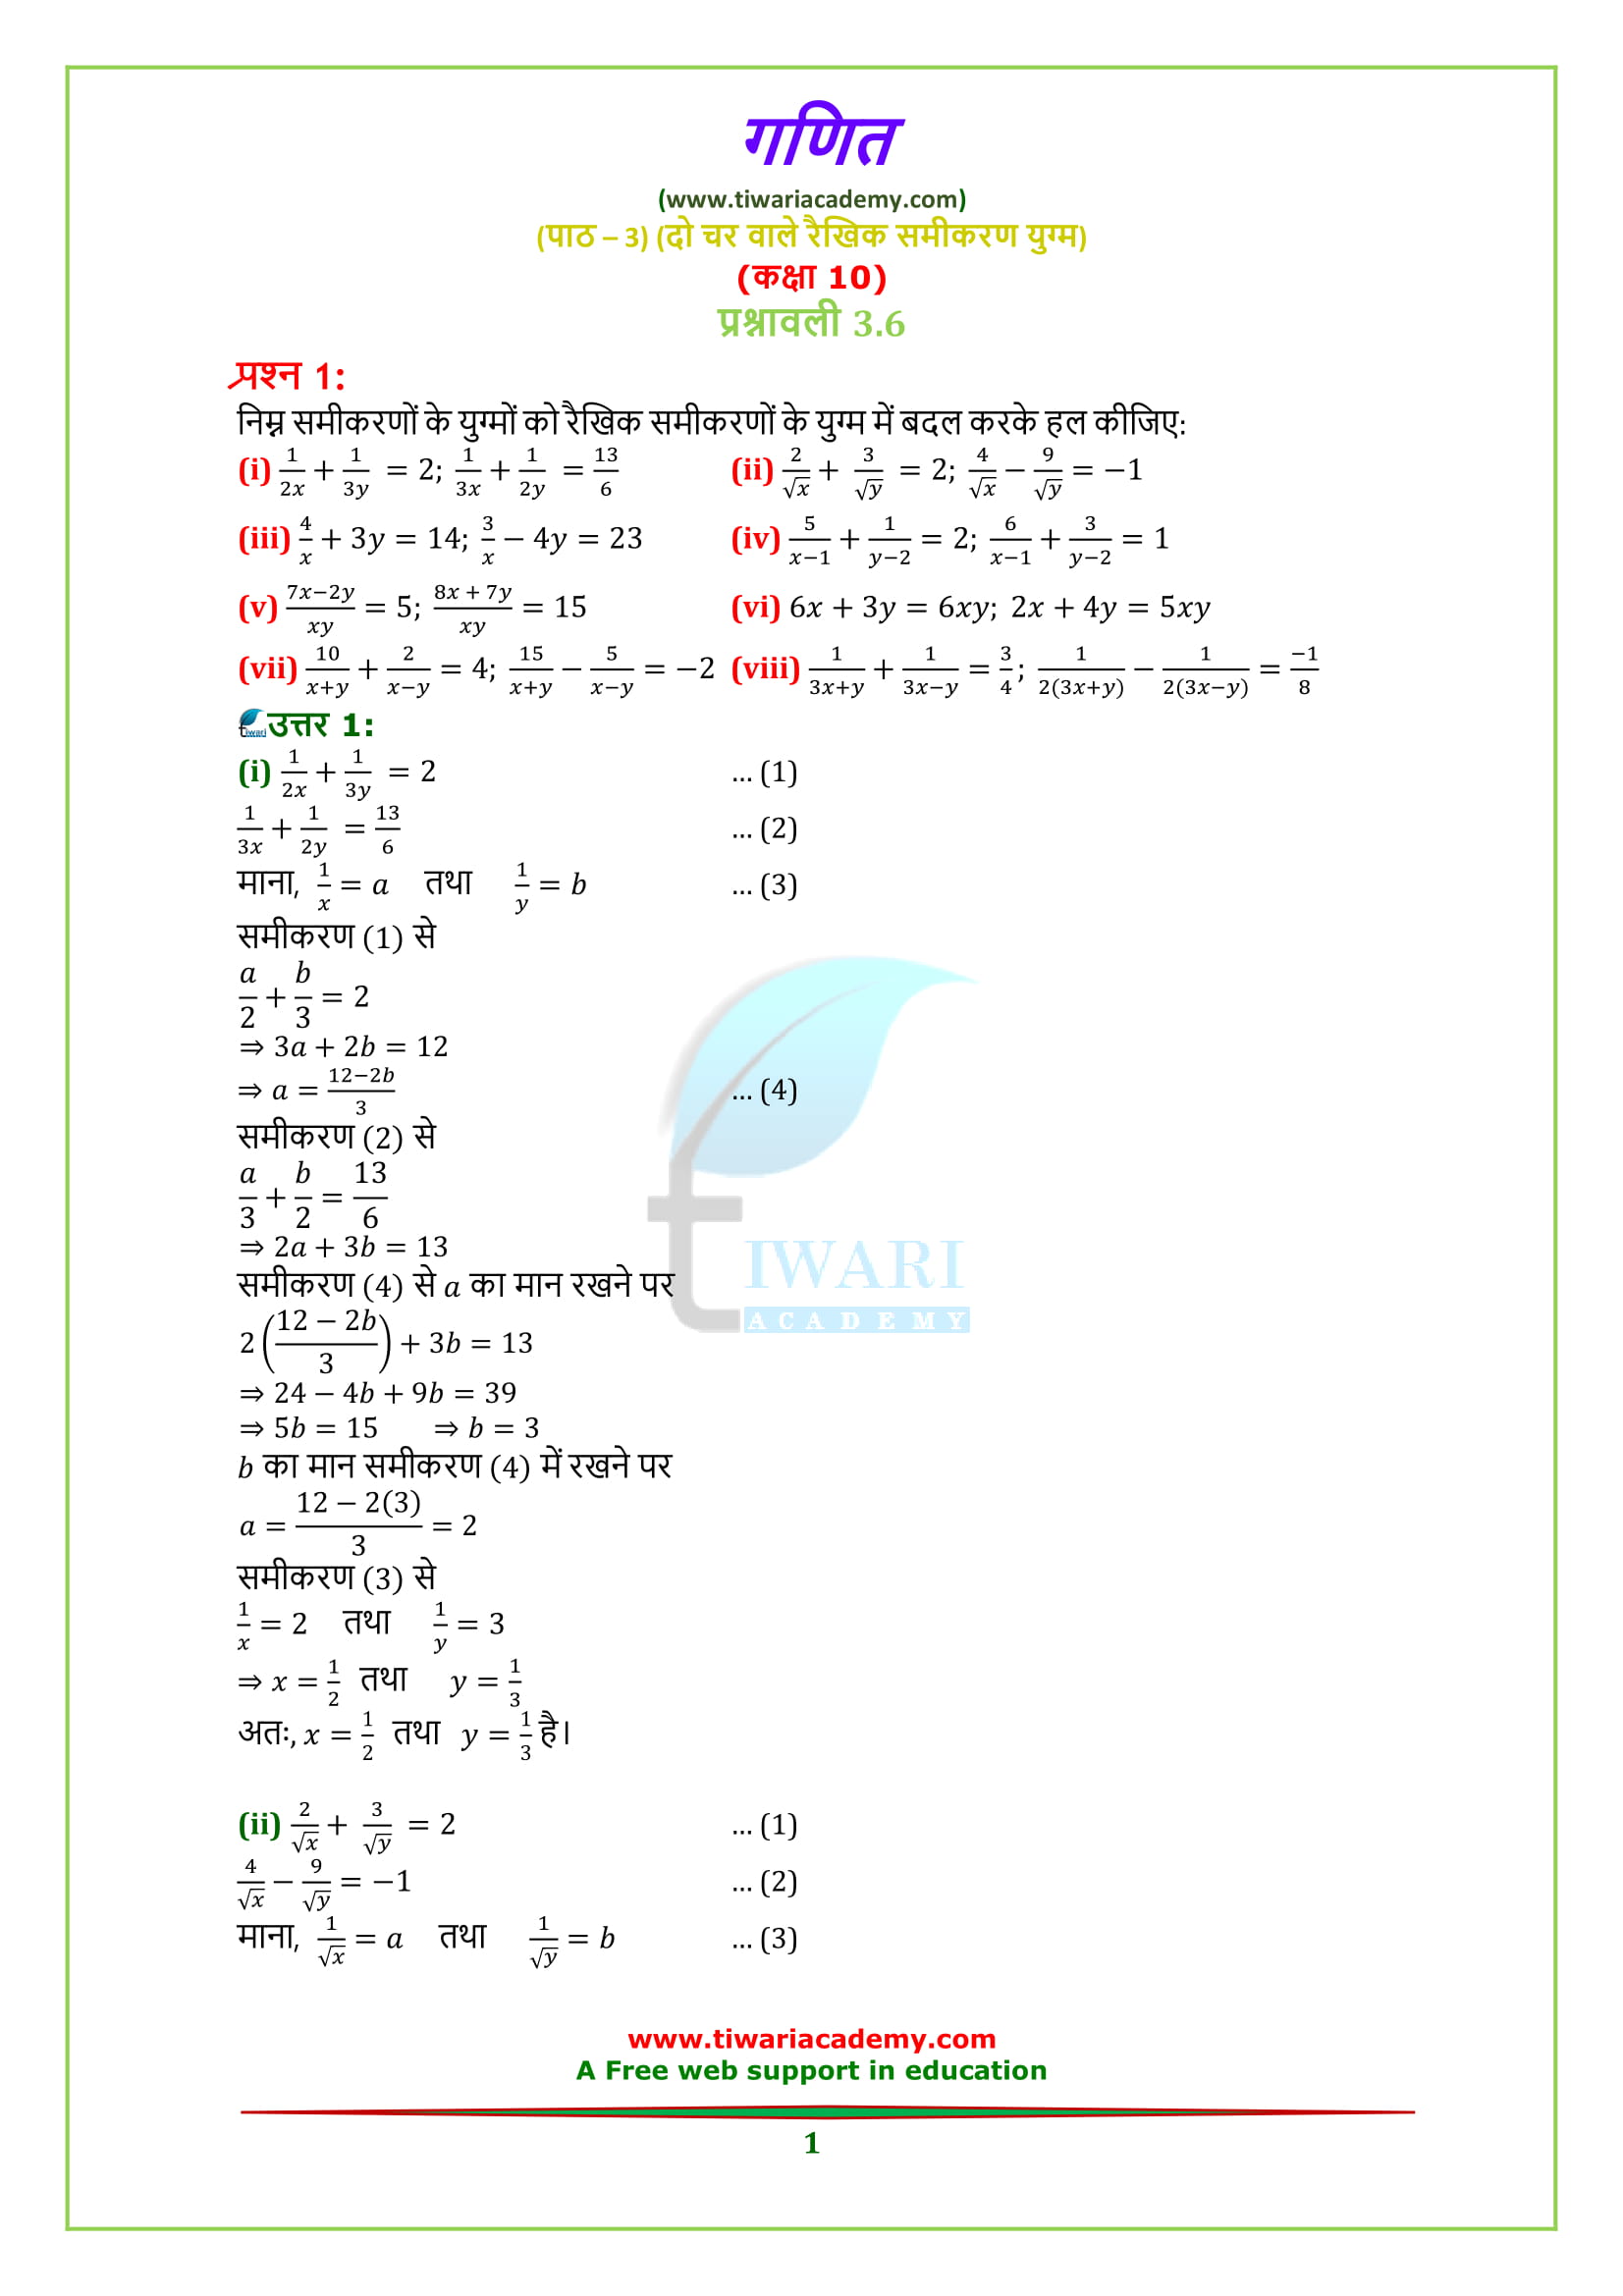 NCERT Solutions for class 10 Maths Chapter 3 Exercise 3.6 in Hindi medium